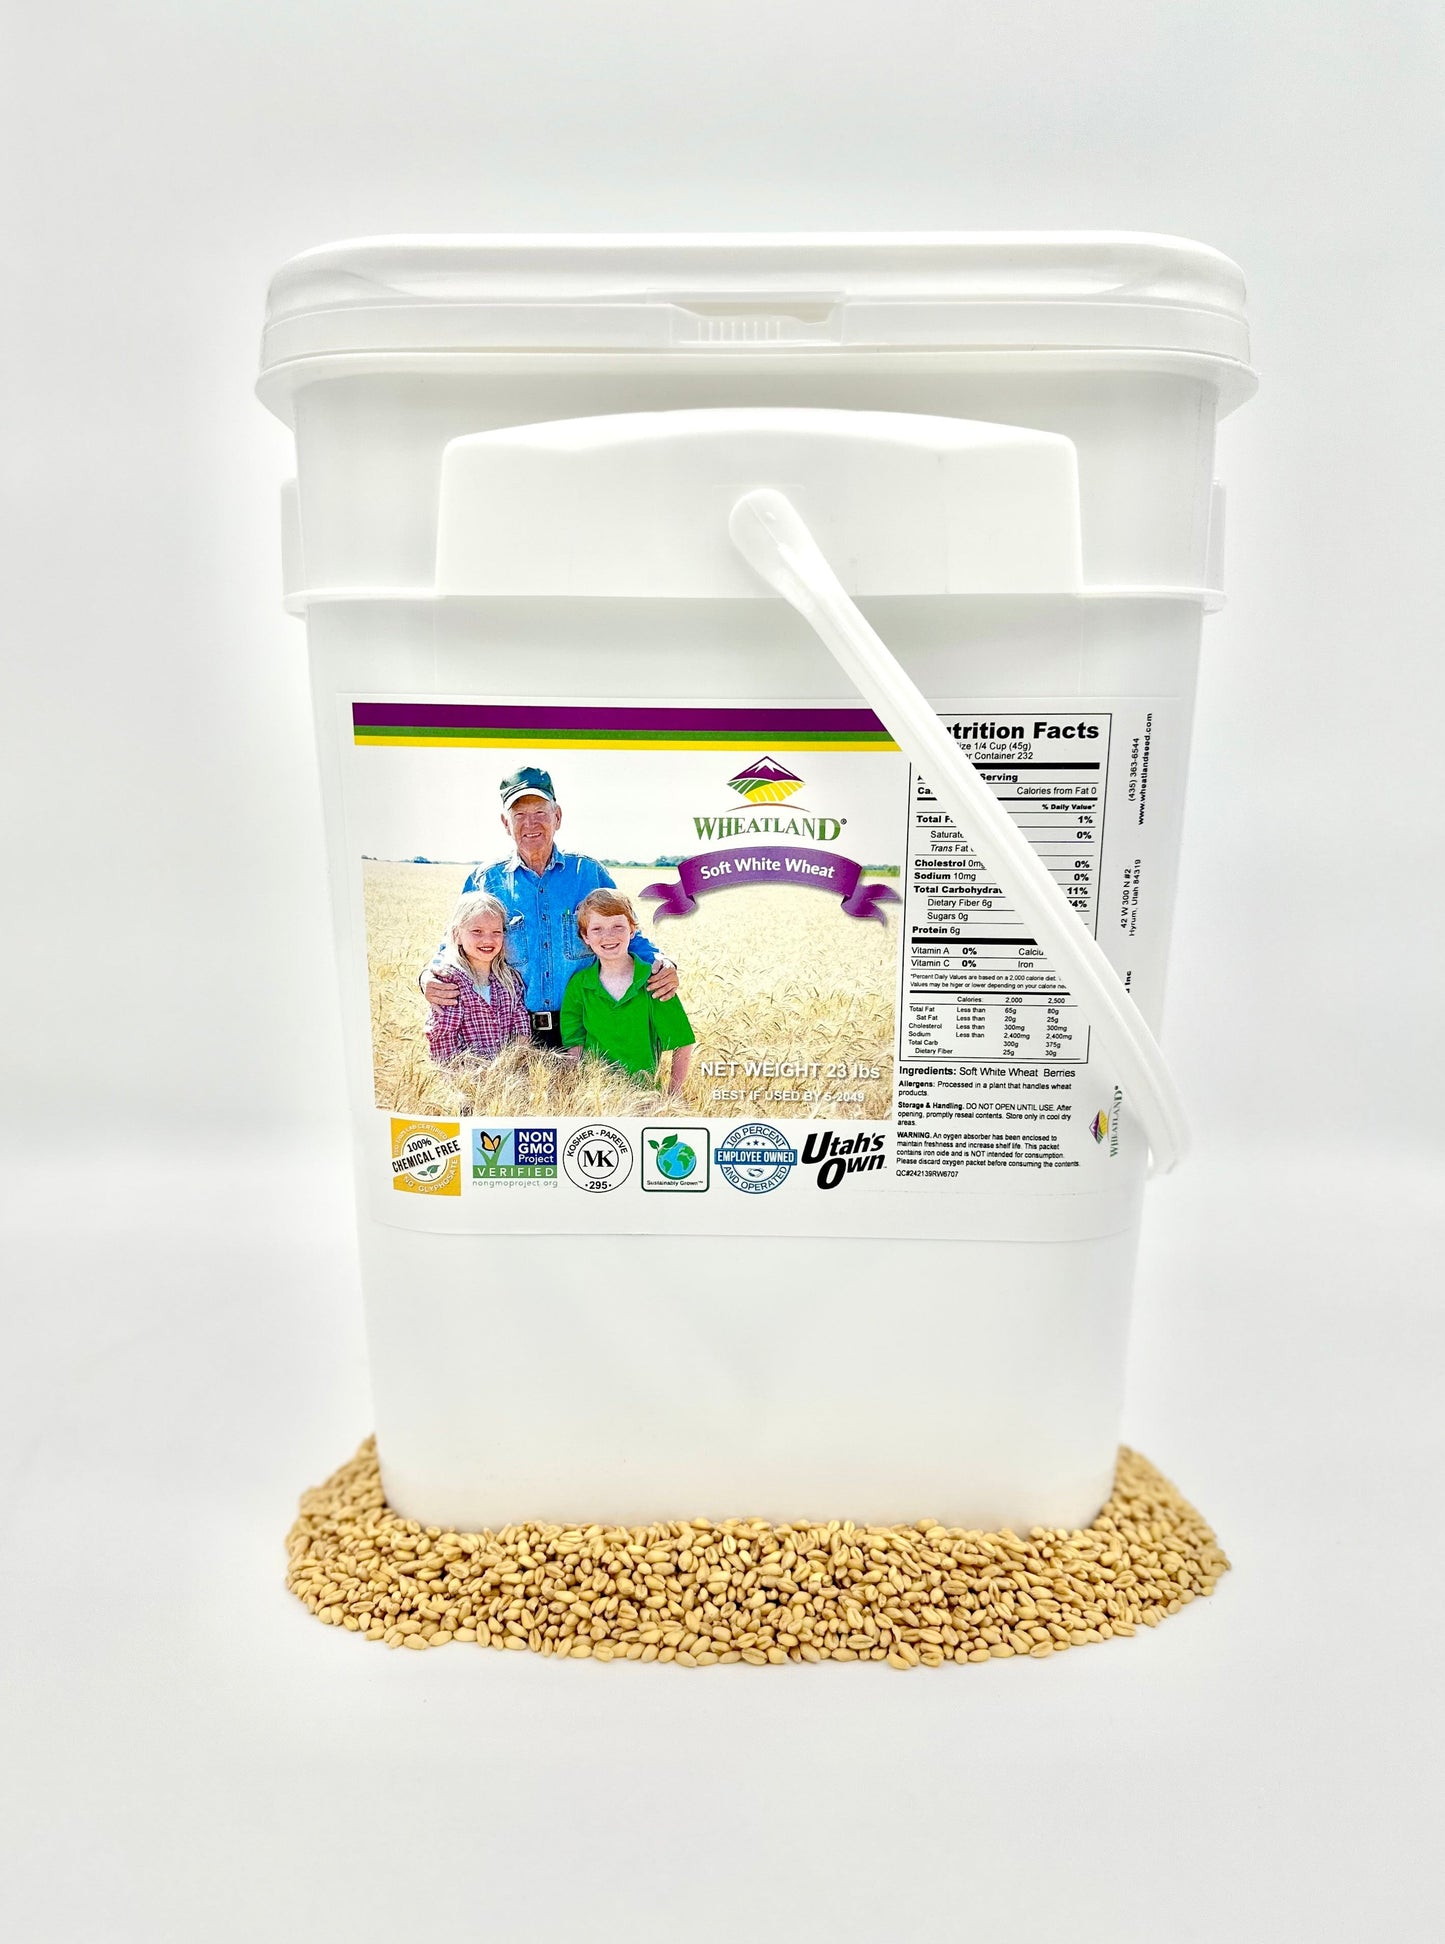 Wheatland™ Soft White Wheat Berries • 23 lbs • Delicious • Healthy Food Option • Farm Fresh • Mylar and Bucket Provide 25 Year Shelf Life • Emergency Food Storage • Non-GMO • Lab Tested Chemical-Free • Premium Baking Quality • Sproutable